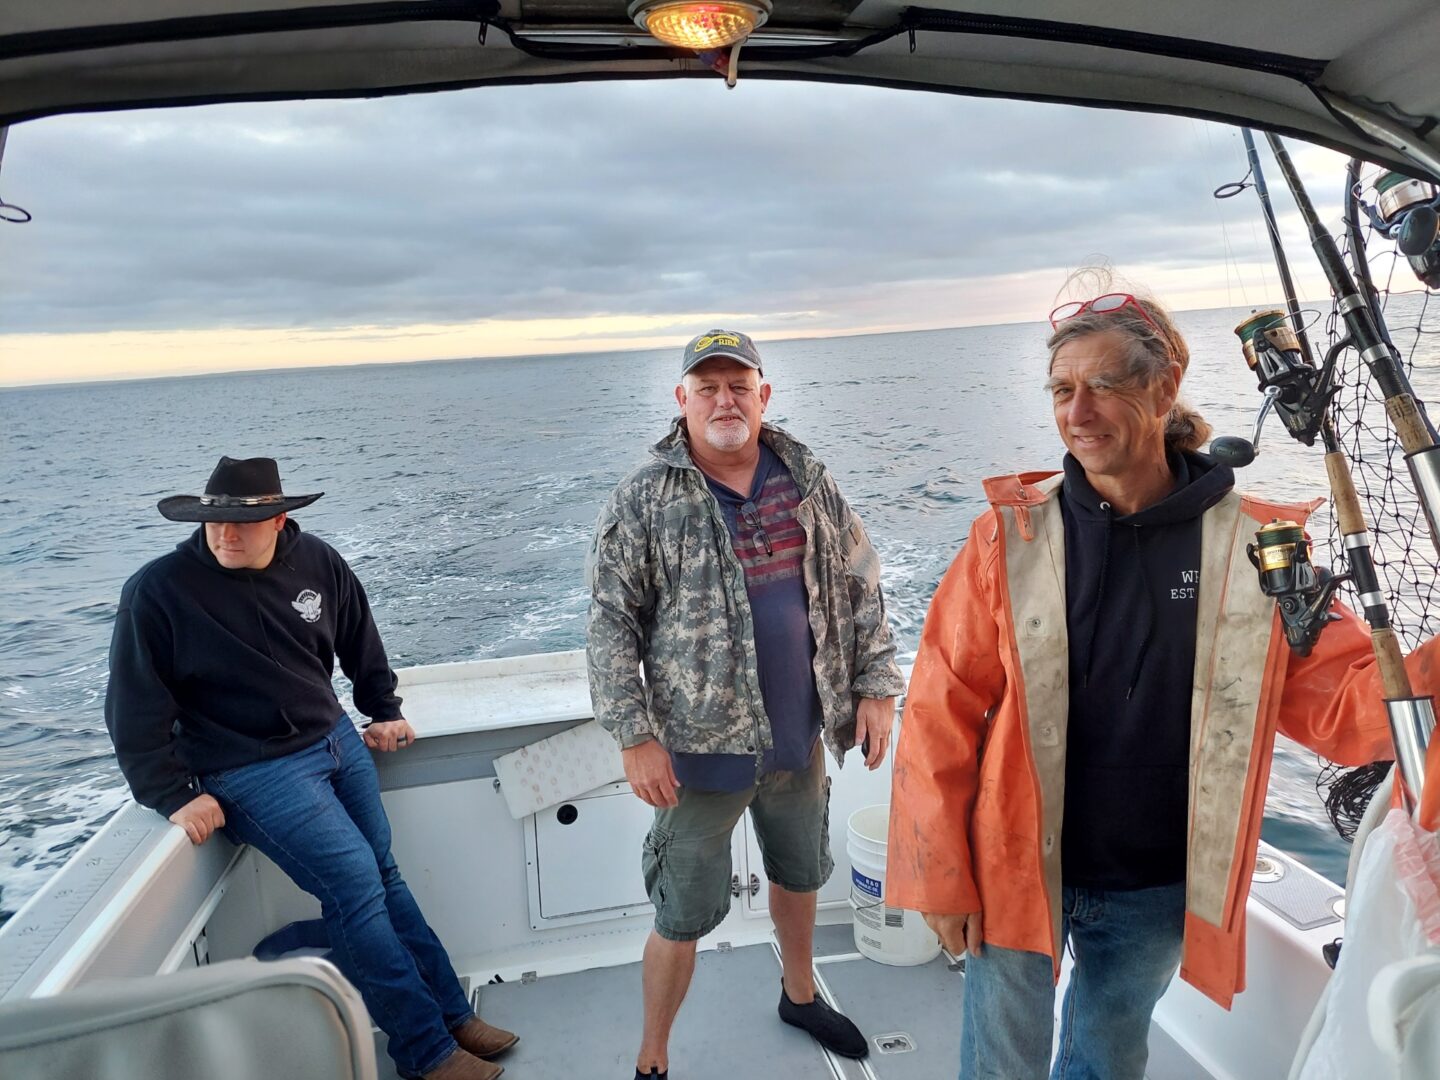 Three Men on a Boat in Water Going for Fishing